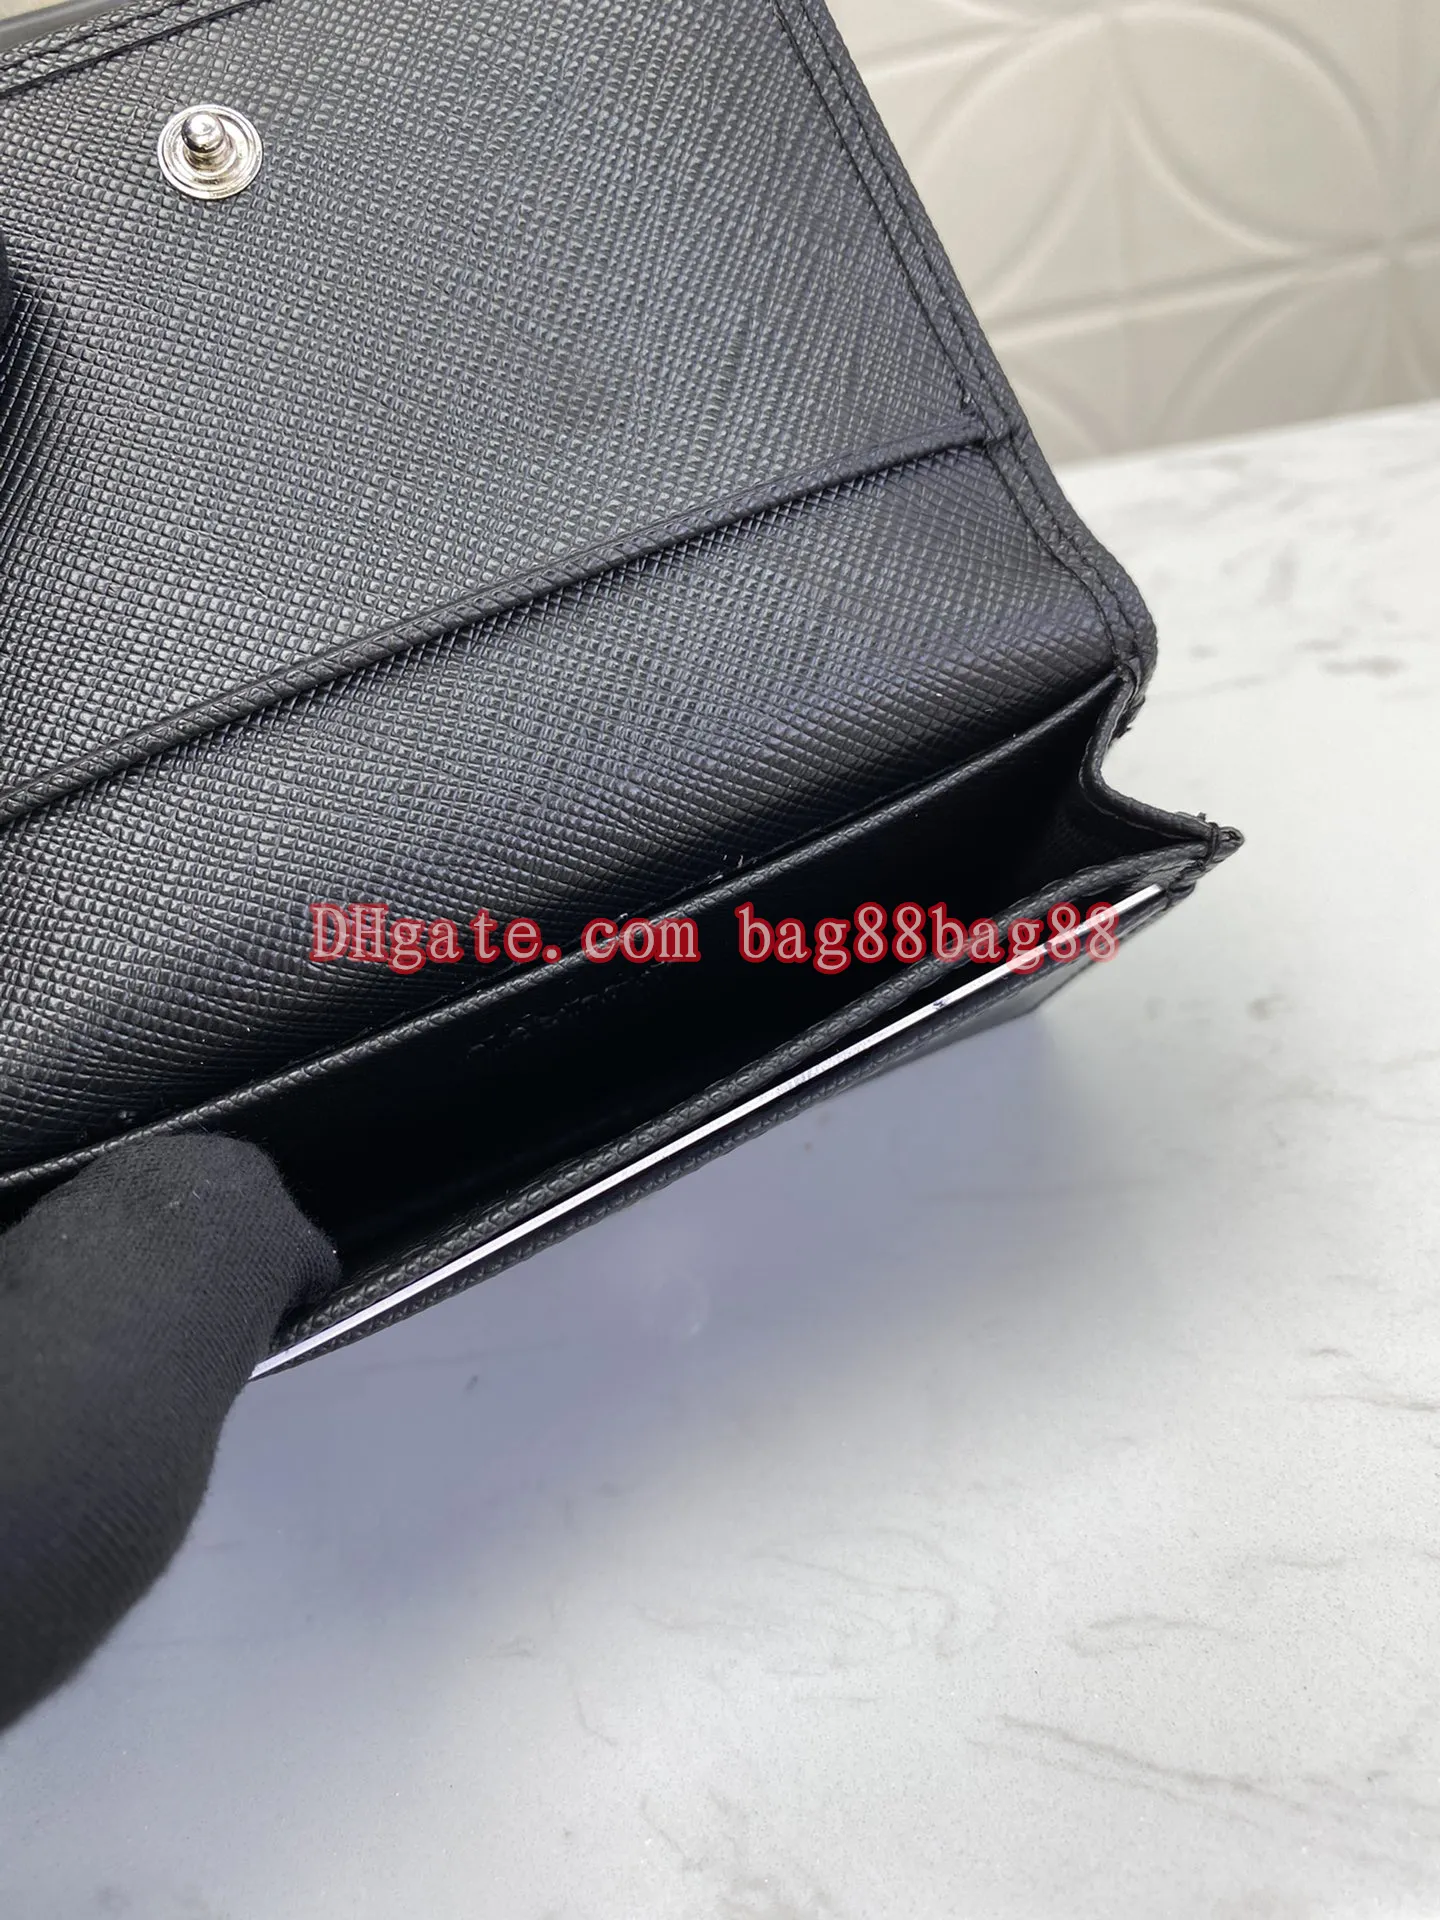 Fashion style men039s card bag Sell the latest styles 2MC122 Italy039s top original single cross leather texture is exce4906727